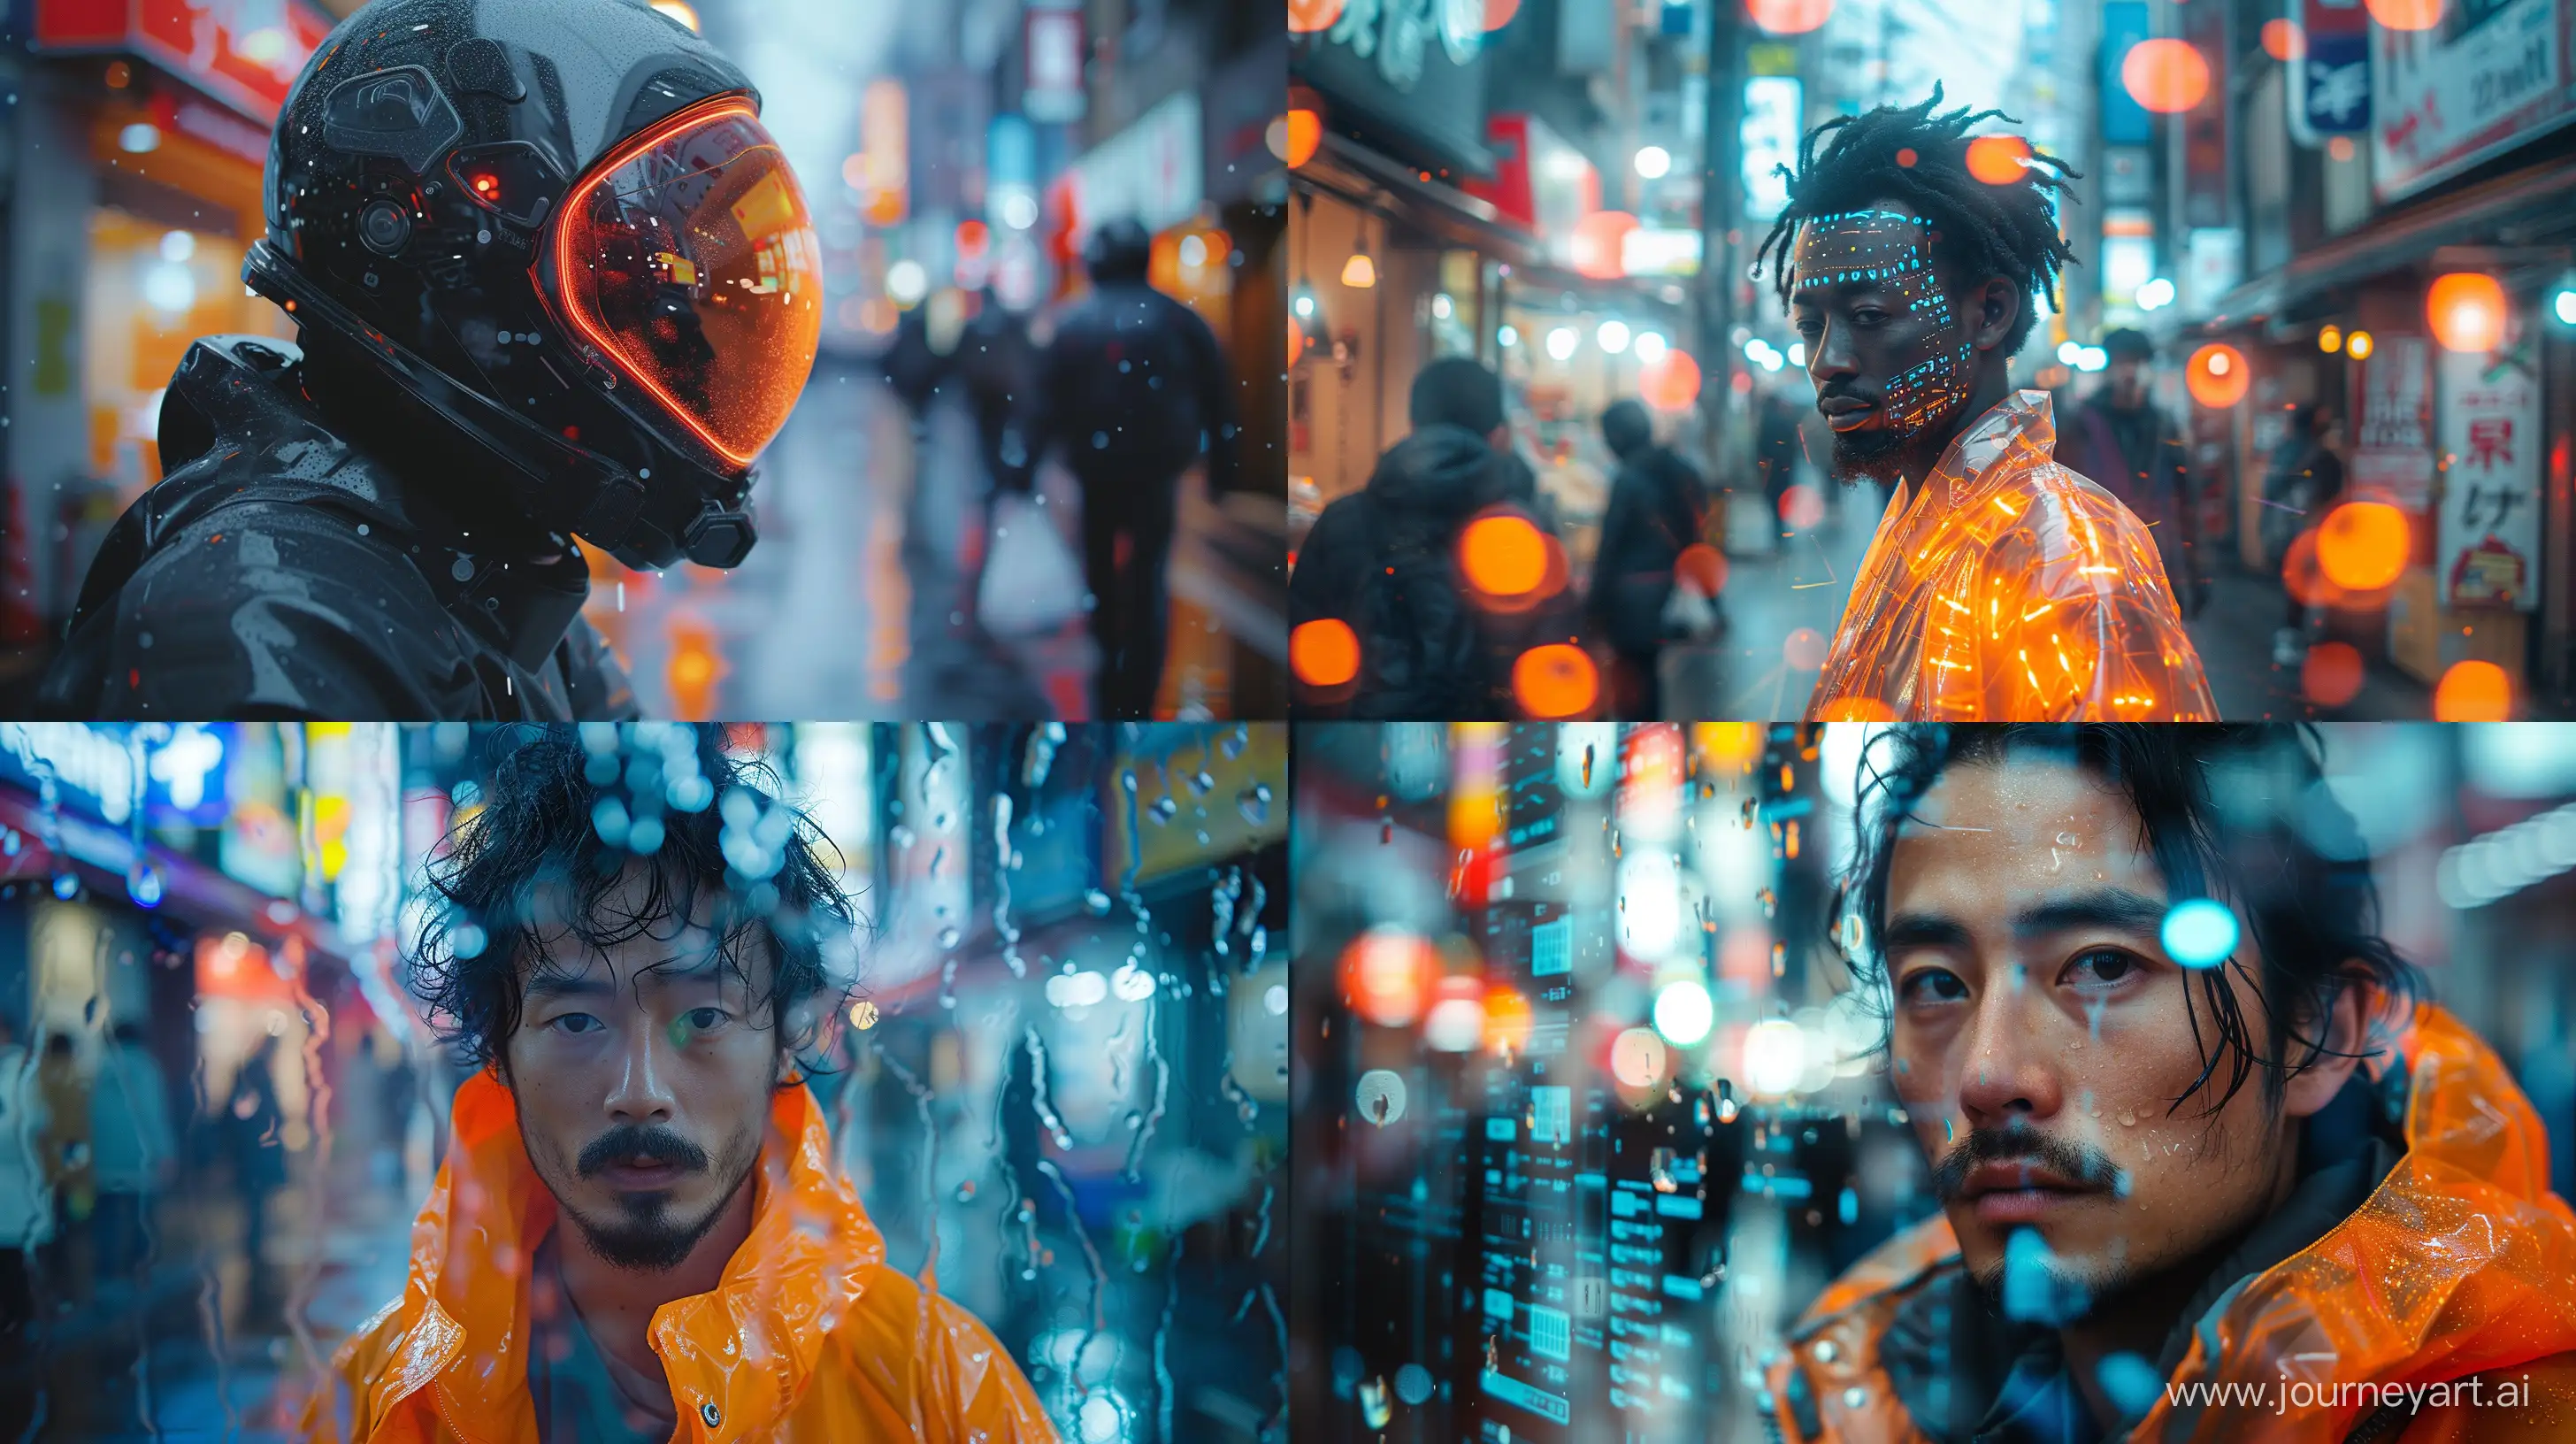 Futuristic-Neon-Flare-Suit-in-Bustling-Japanese-Market